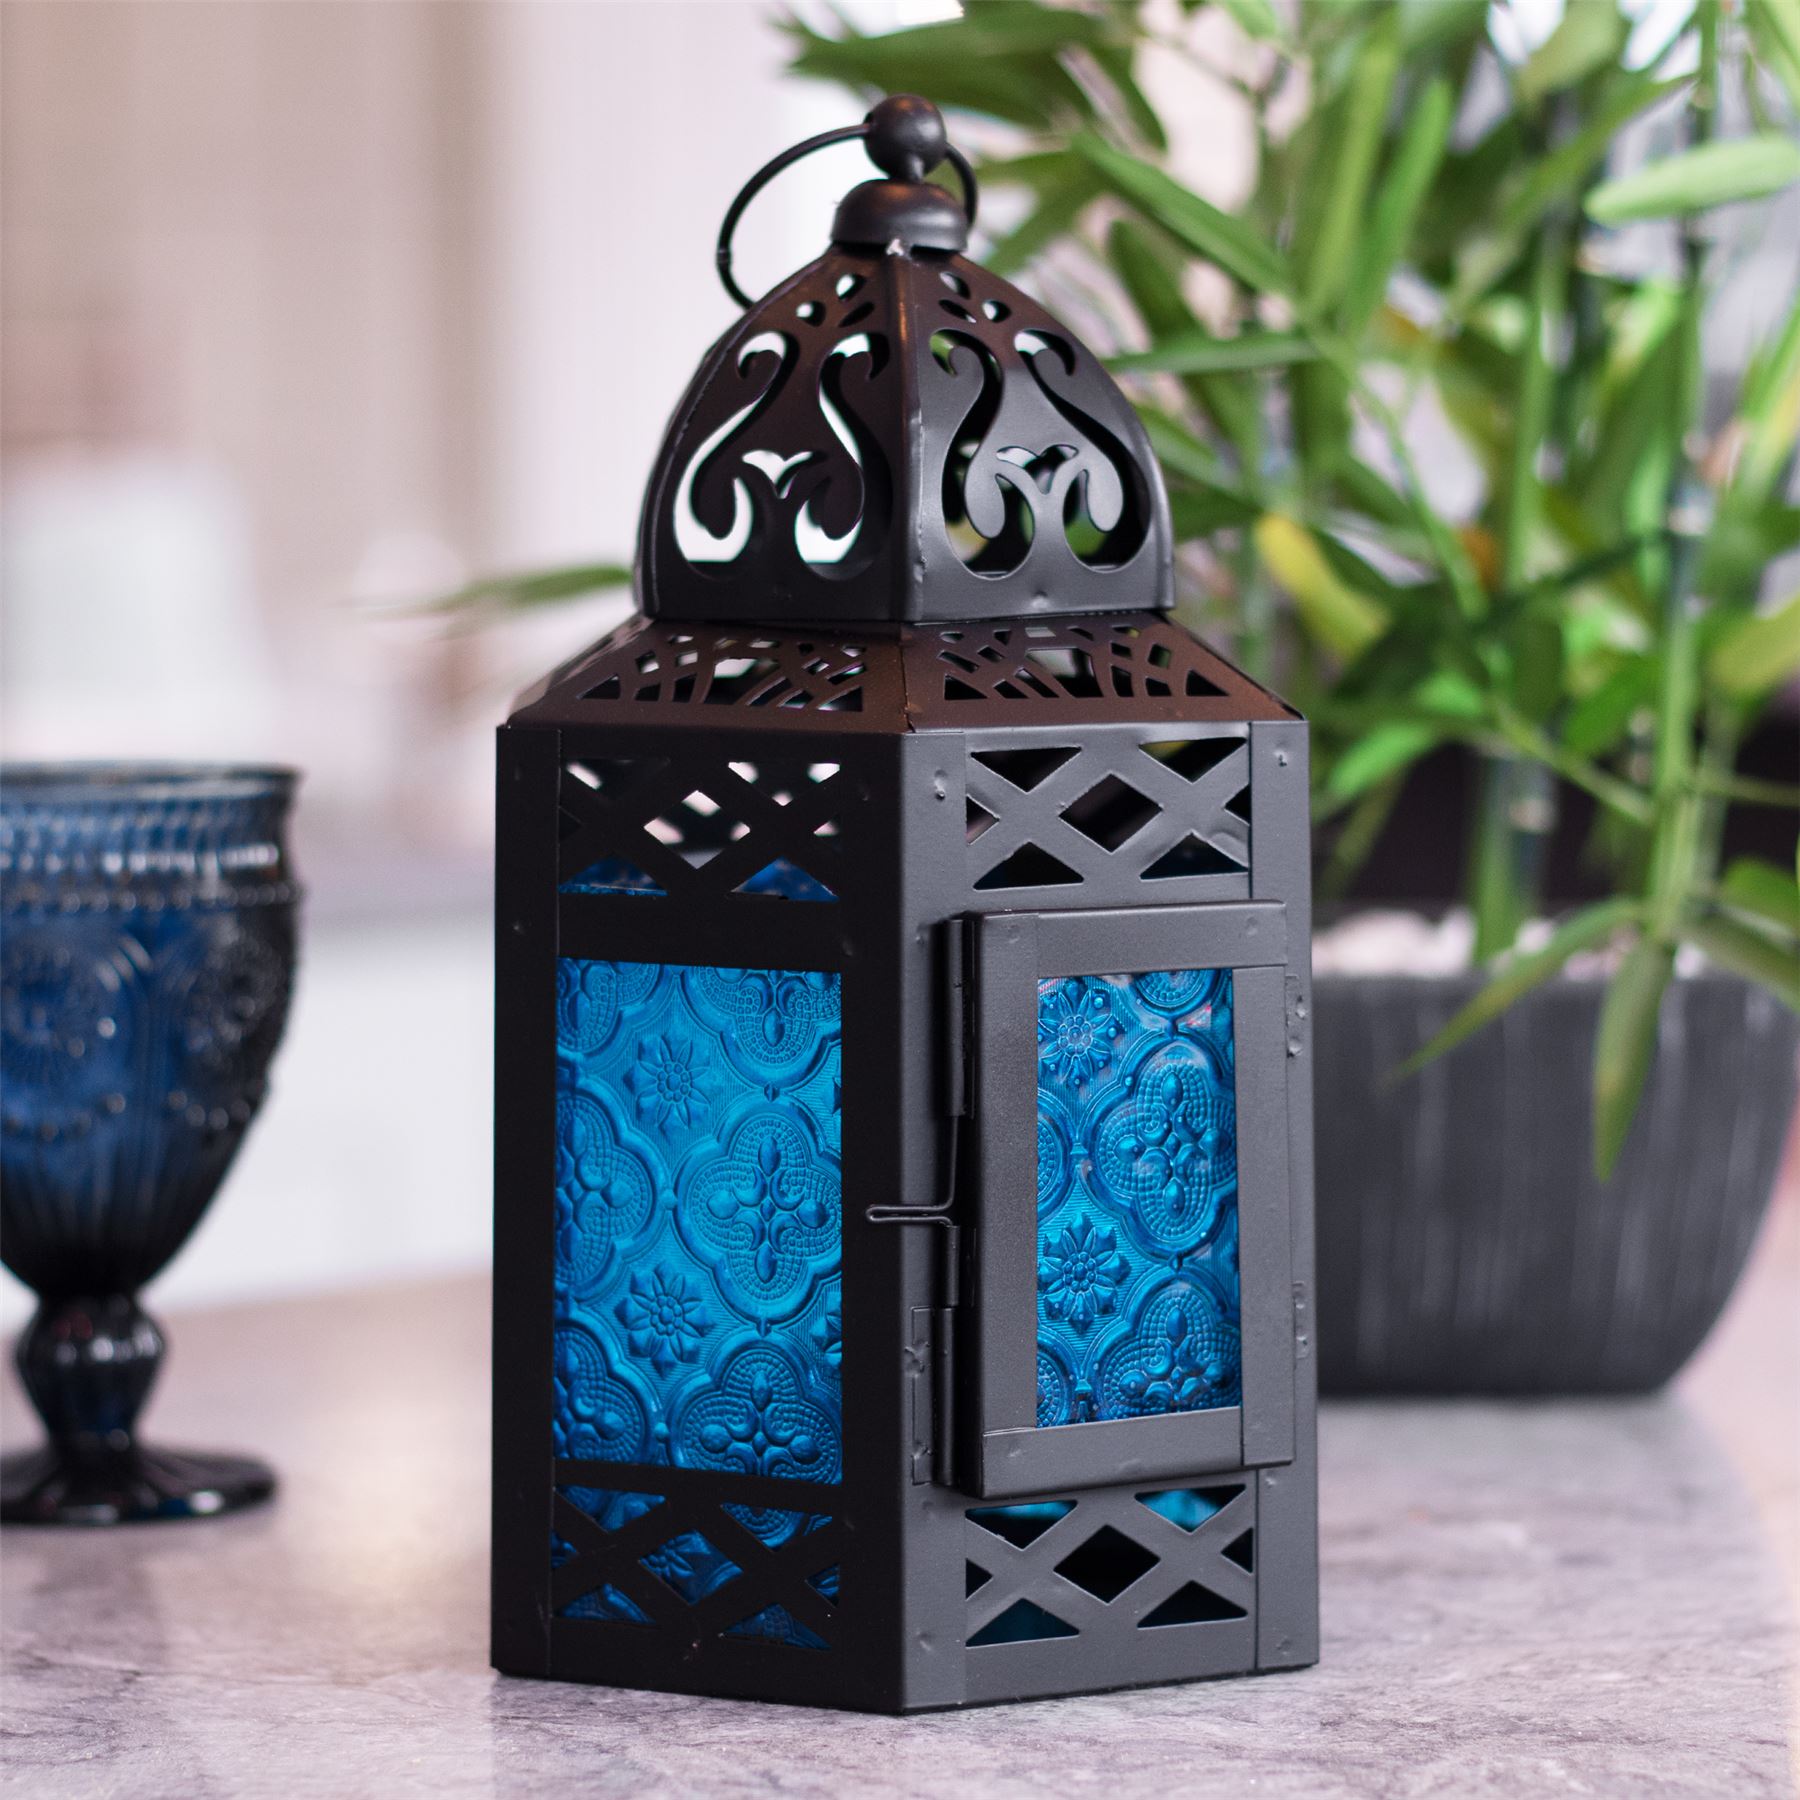 Blue Moroccan Hanging Lantern Tea Light Candle Holder in Vintage Style | M&W